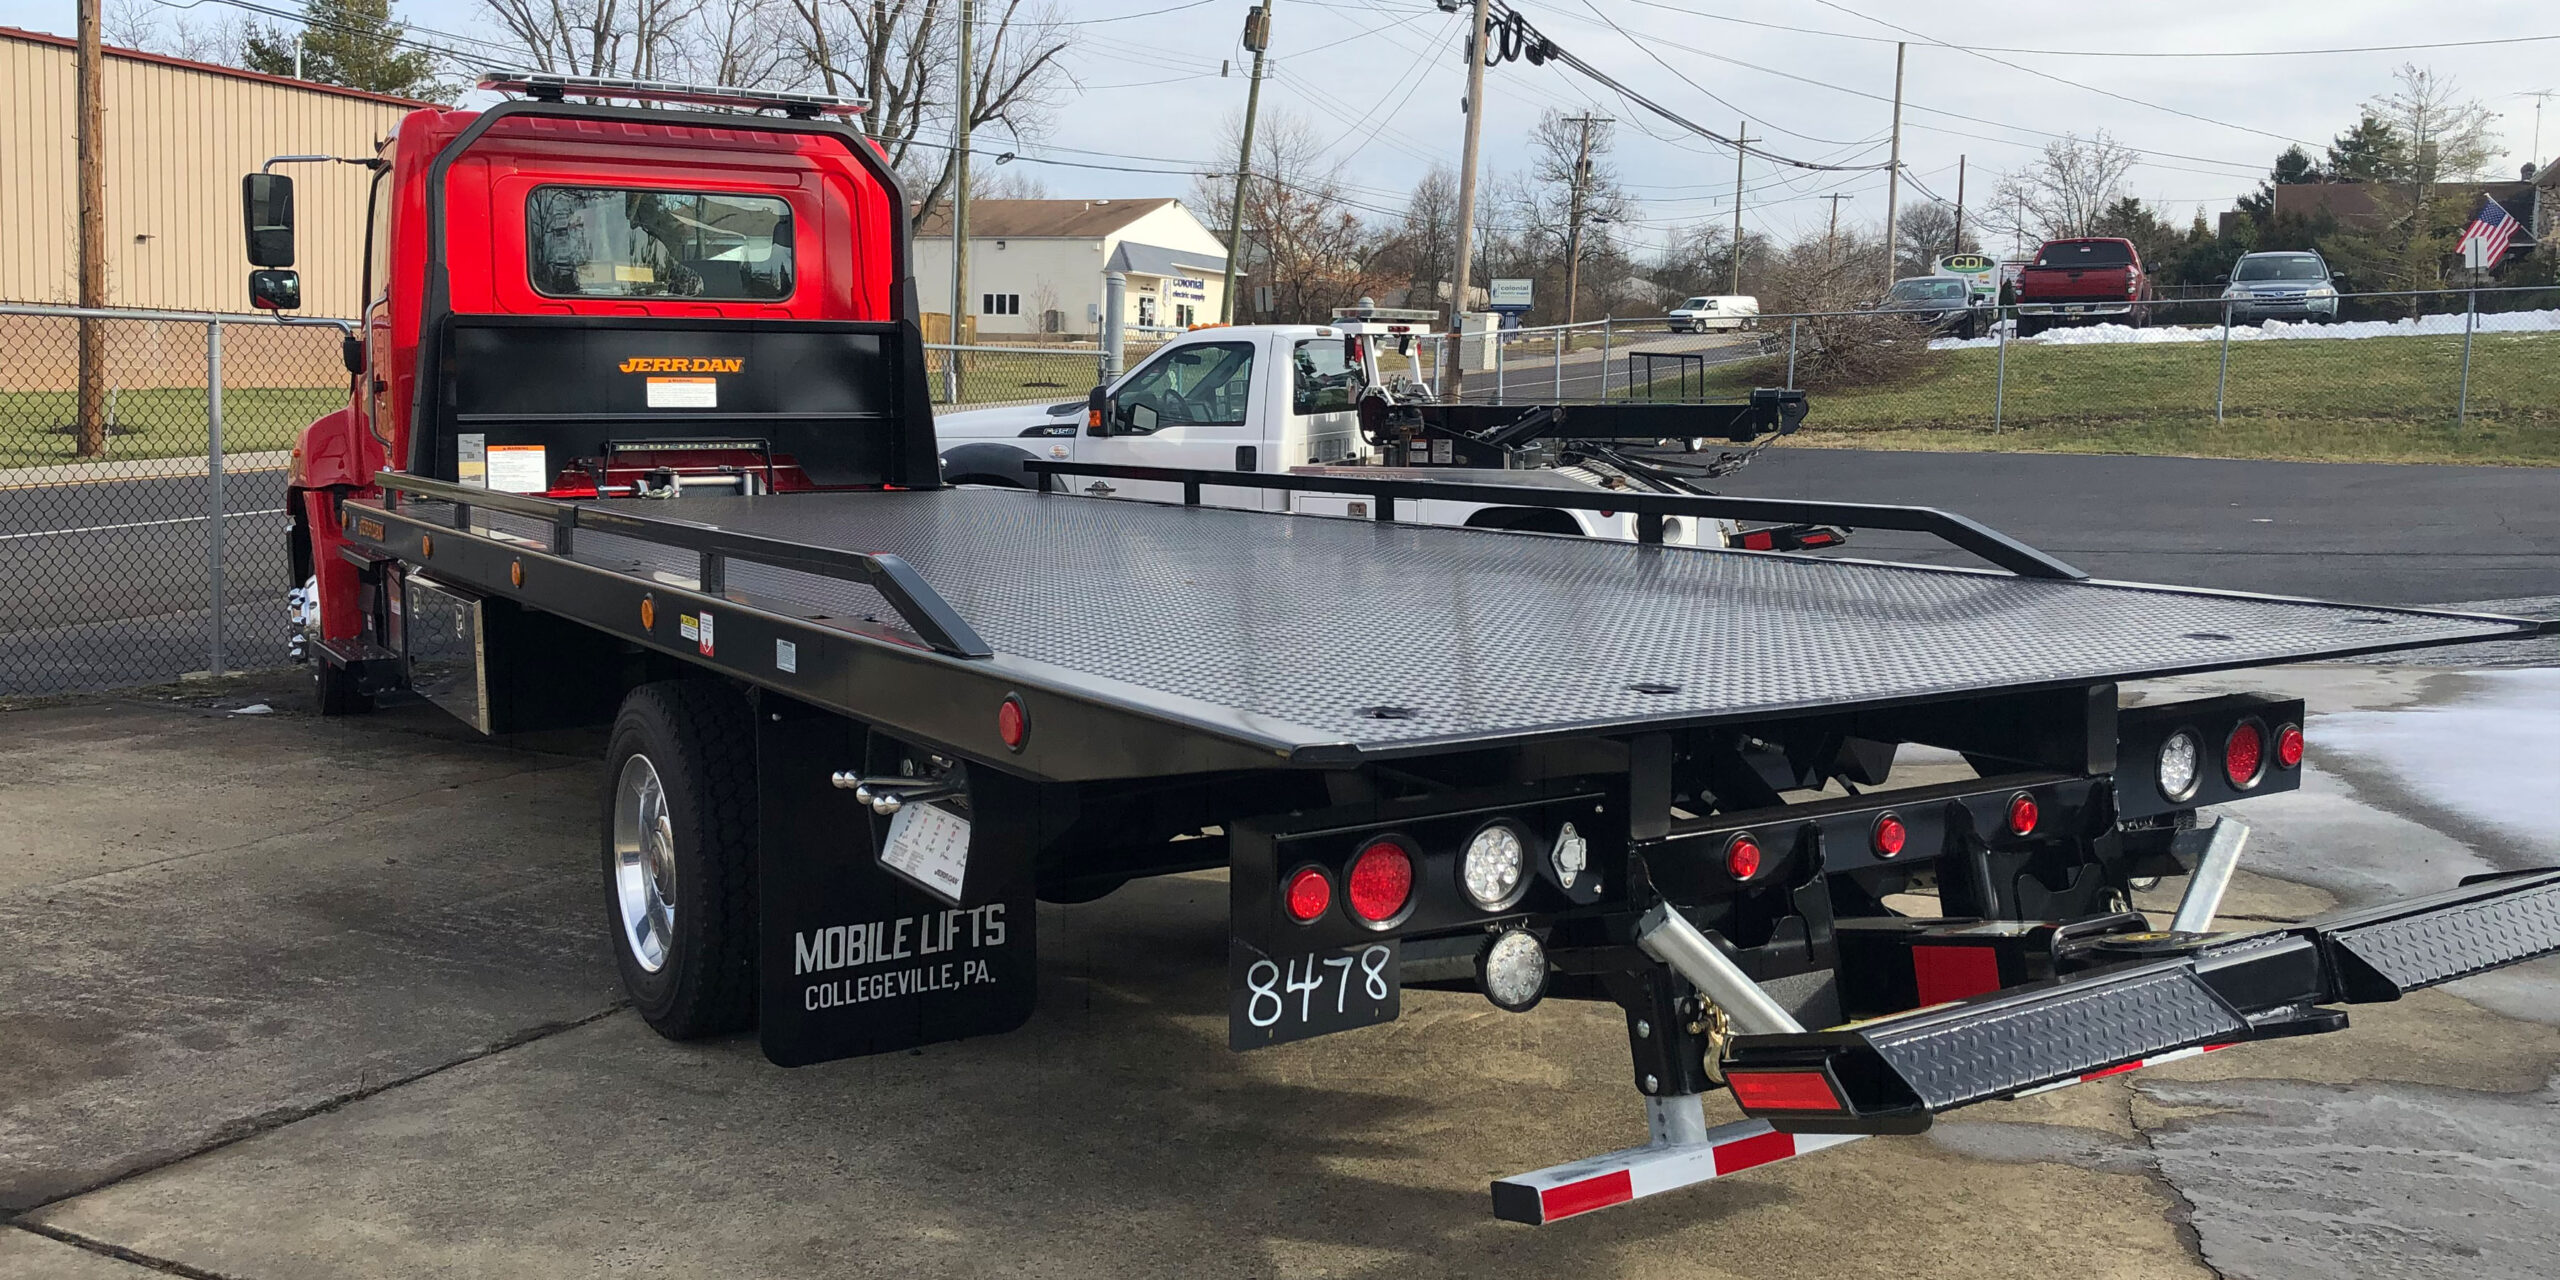 Bucket Trucks and Towing Equipment Sales and Rentals | Mobile Lifts, LLC